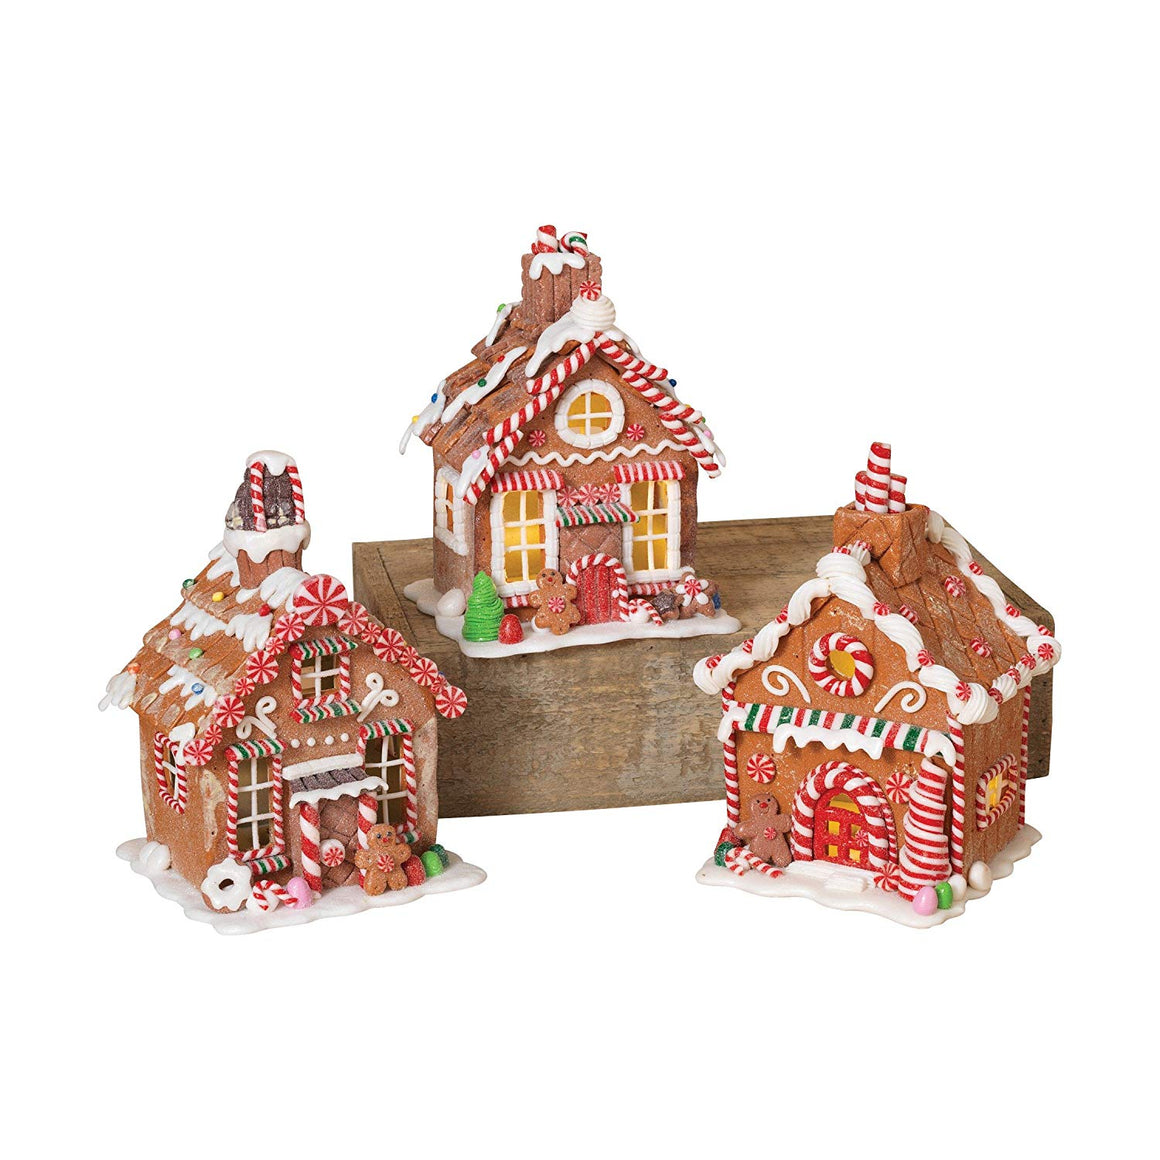 7 Inches High Lighted Battery Operated Clay Dough Christmas Gingerbread Houses, 3 Assorted